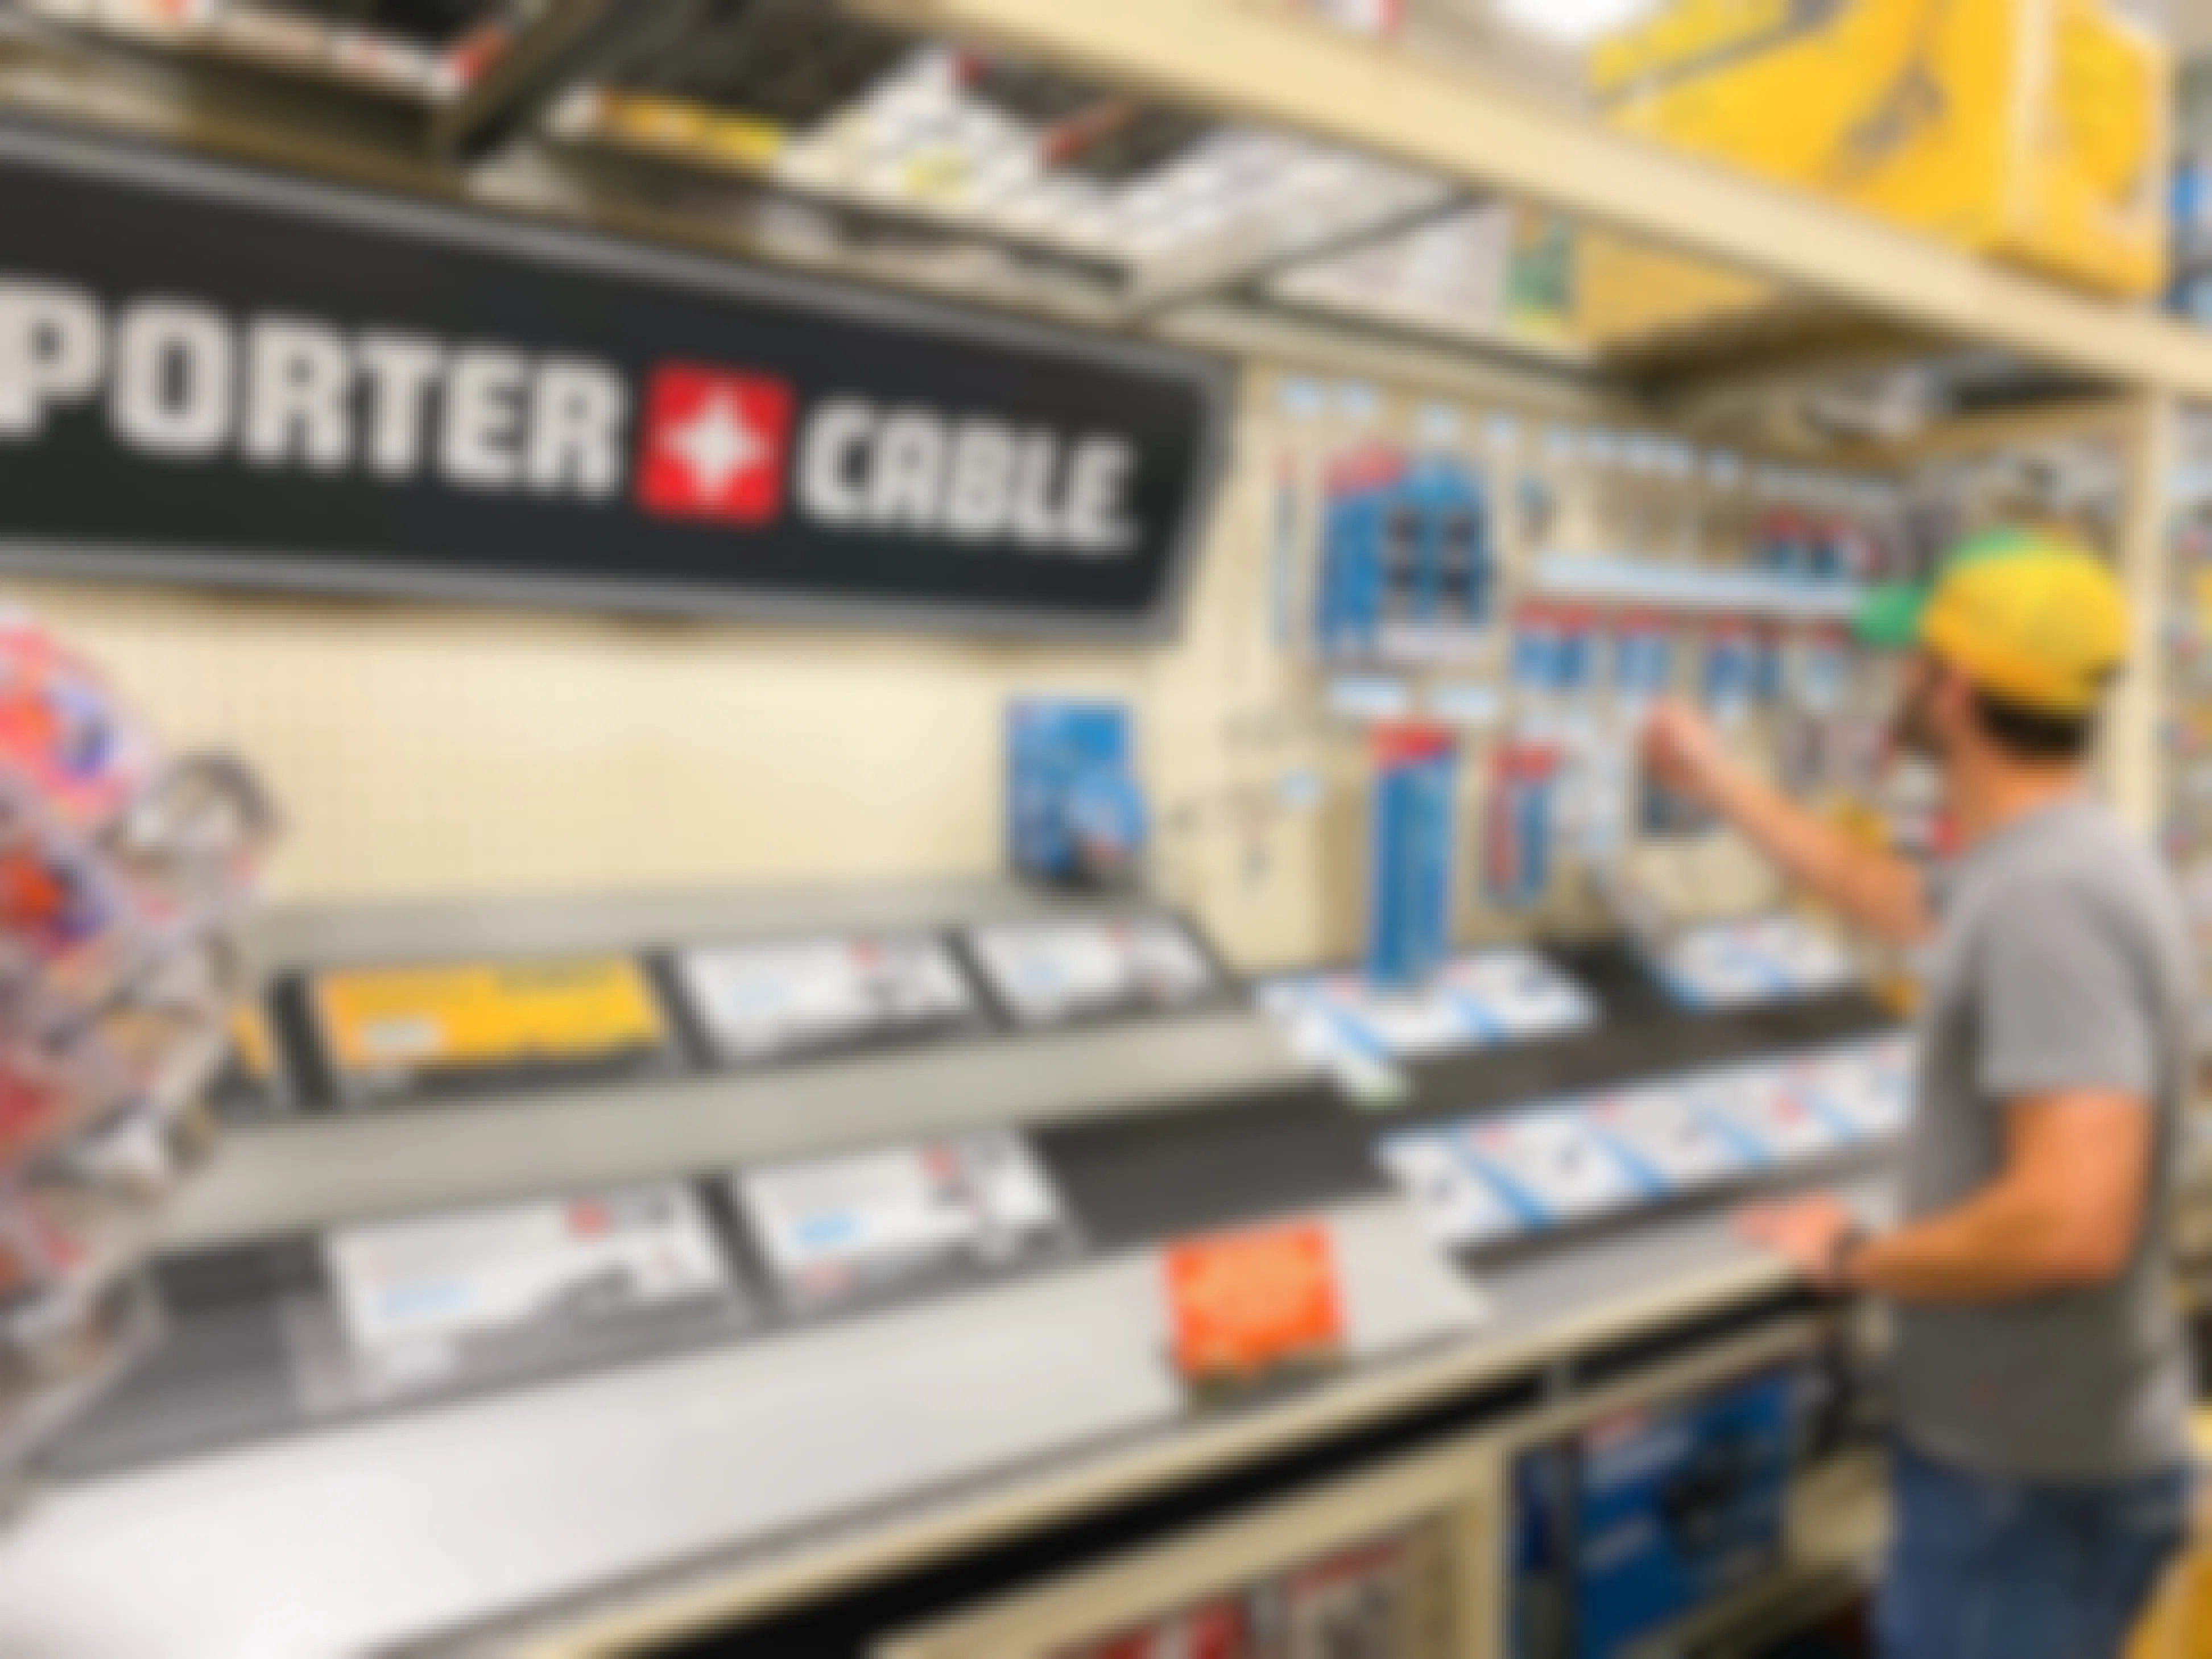 A man looking at items in the Porter Cable tool section of Tractor Supply.